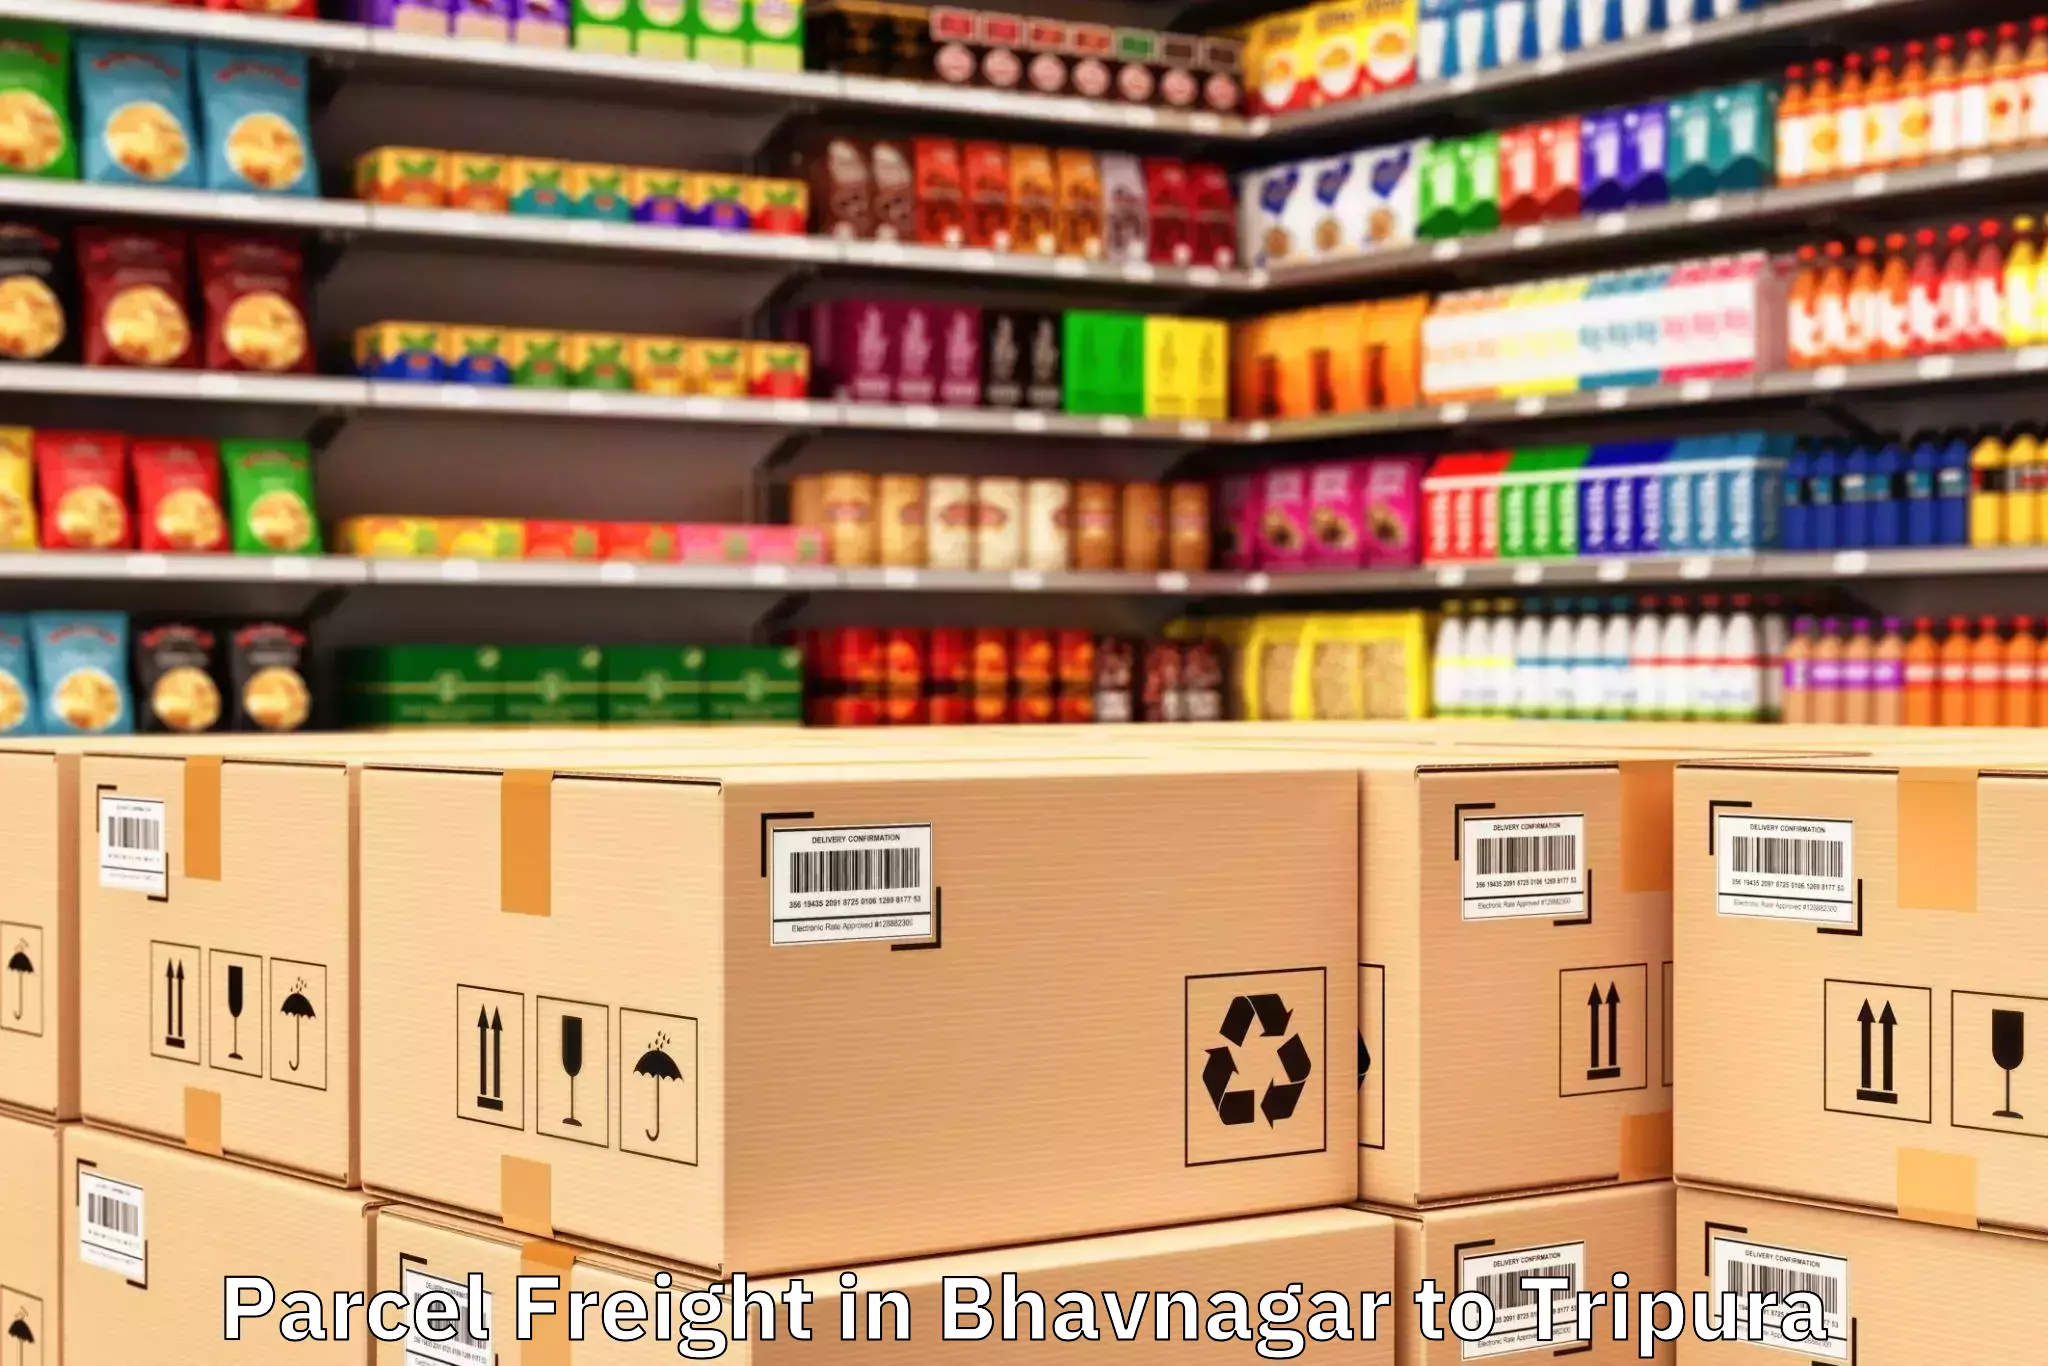 Top Bhavnagar to Tripura Parcel Freight Available